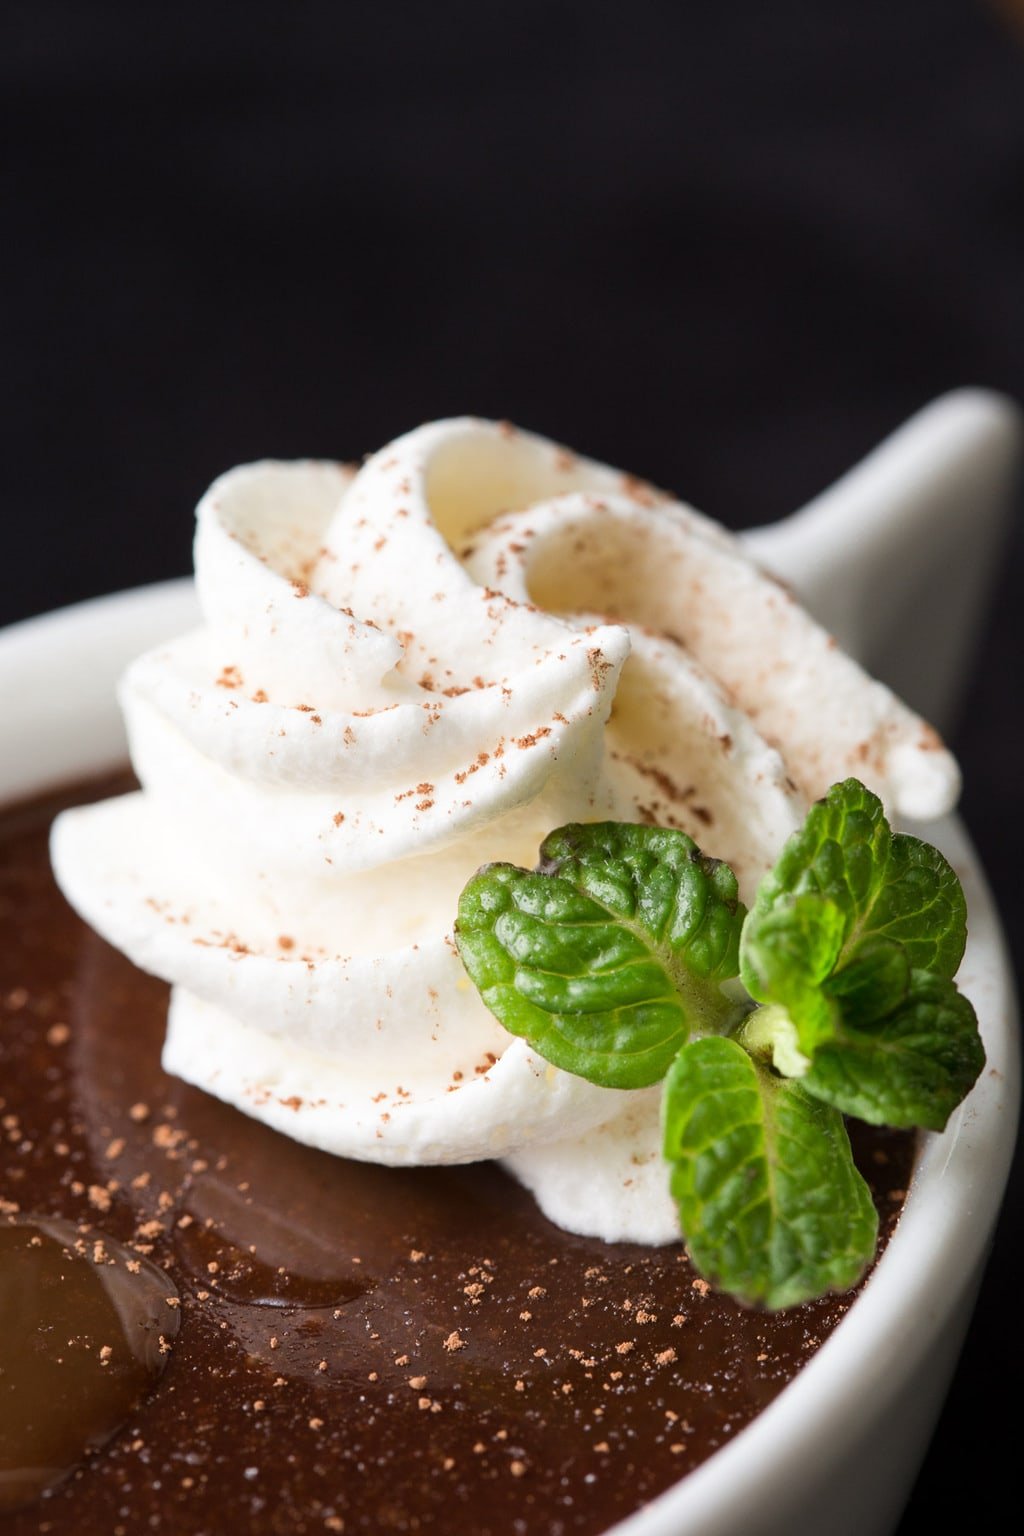 Vertical extreme closeup photo of a Ridiculously Easy Blender Chocolate Pots de Crème garnished with whipped cream and fresh mint leaves.